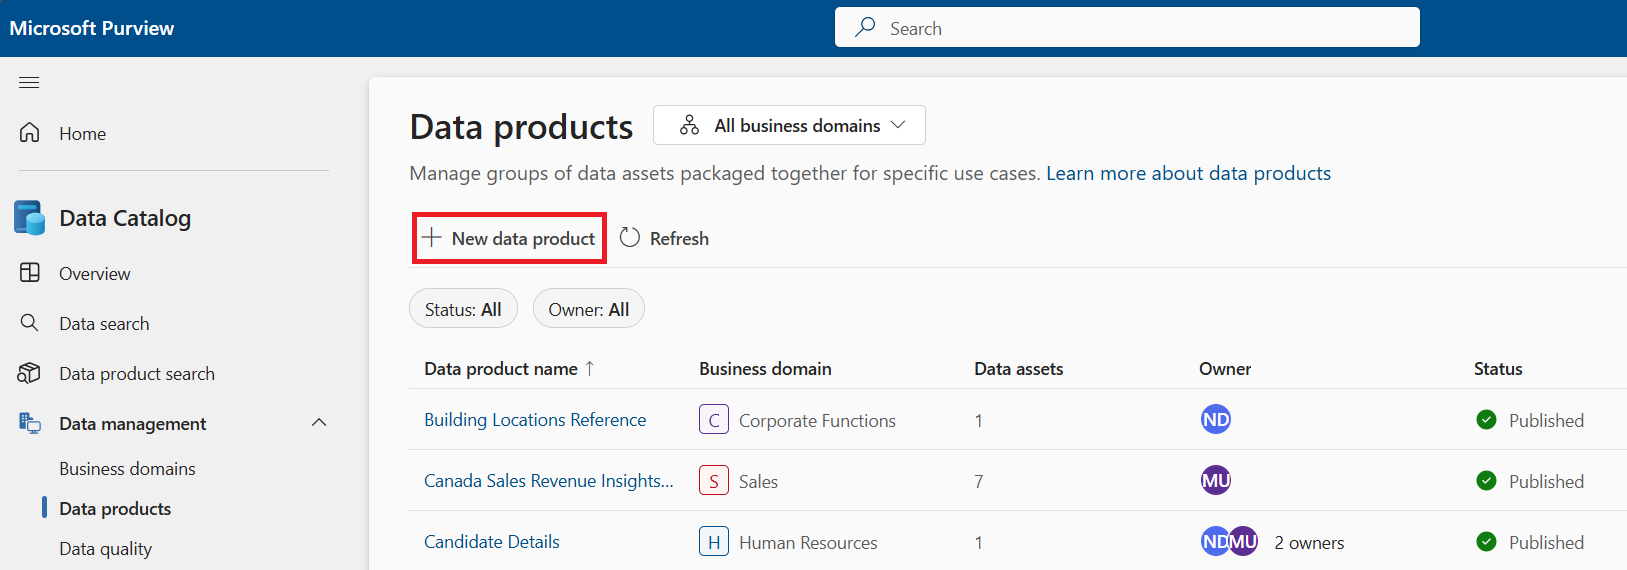 Screenshot of the data products page with the New data product button highlighted.